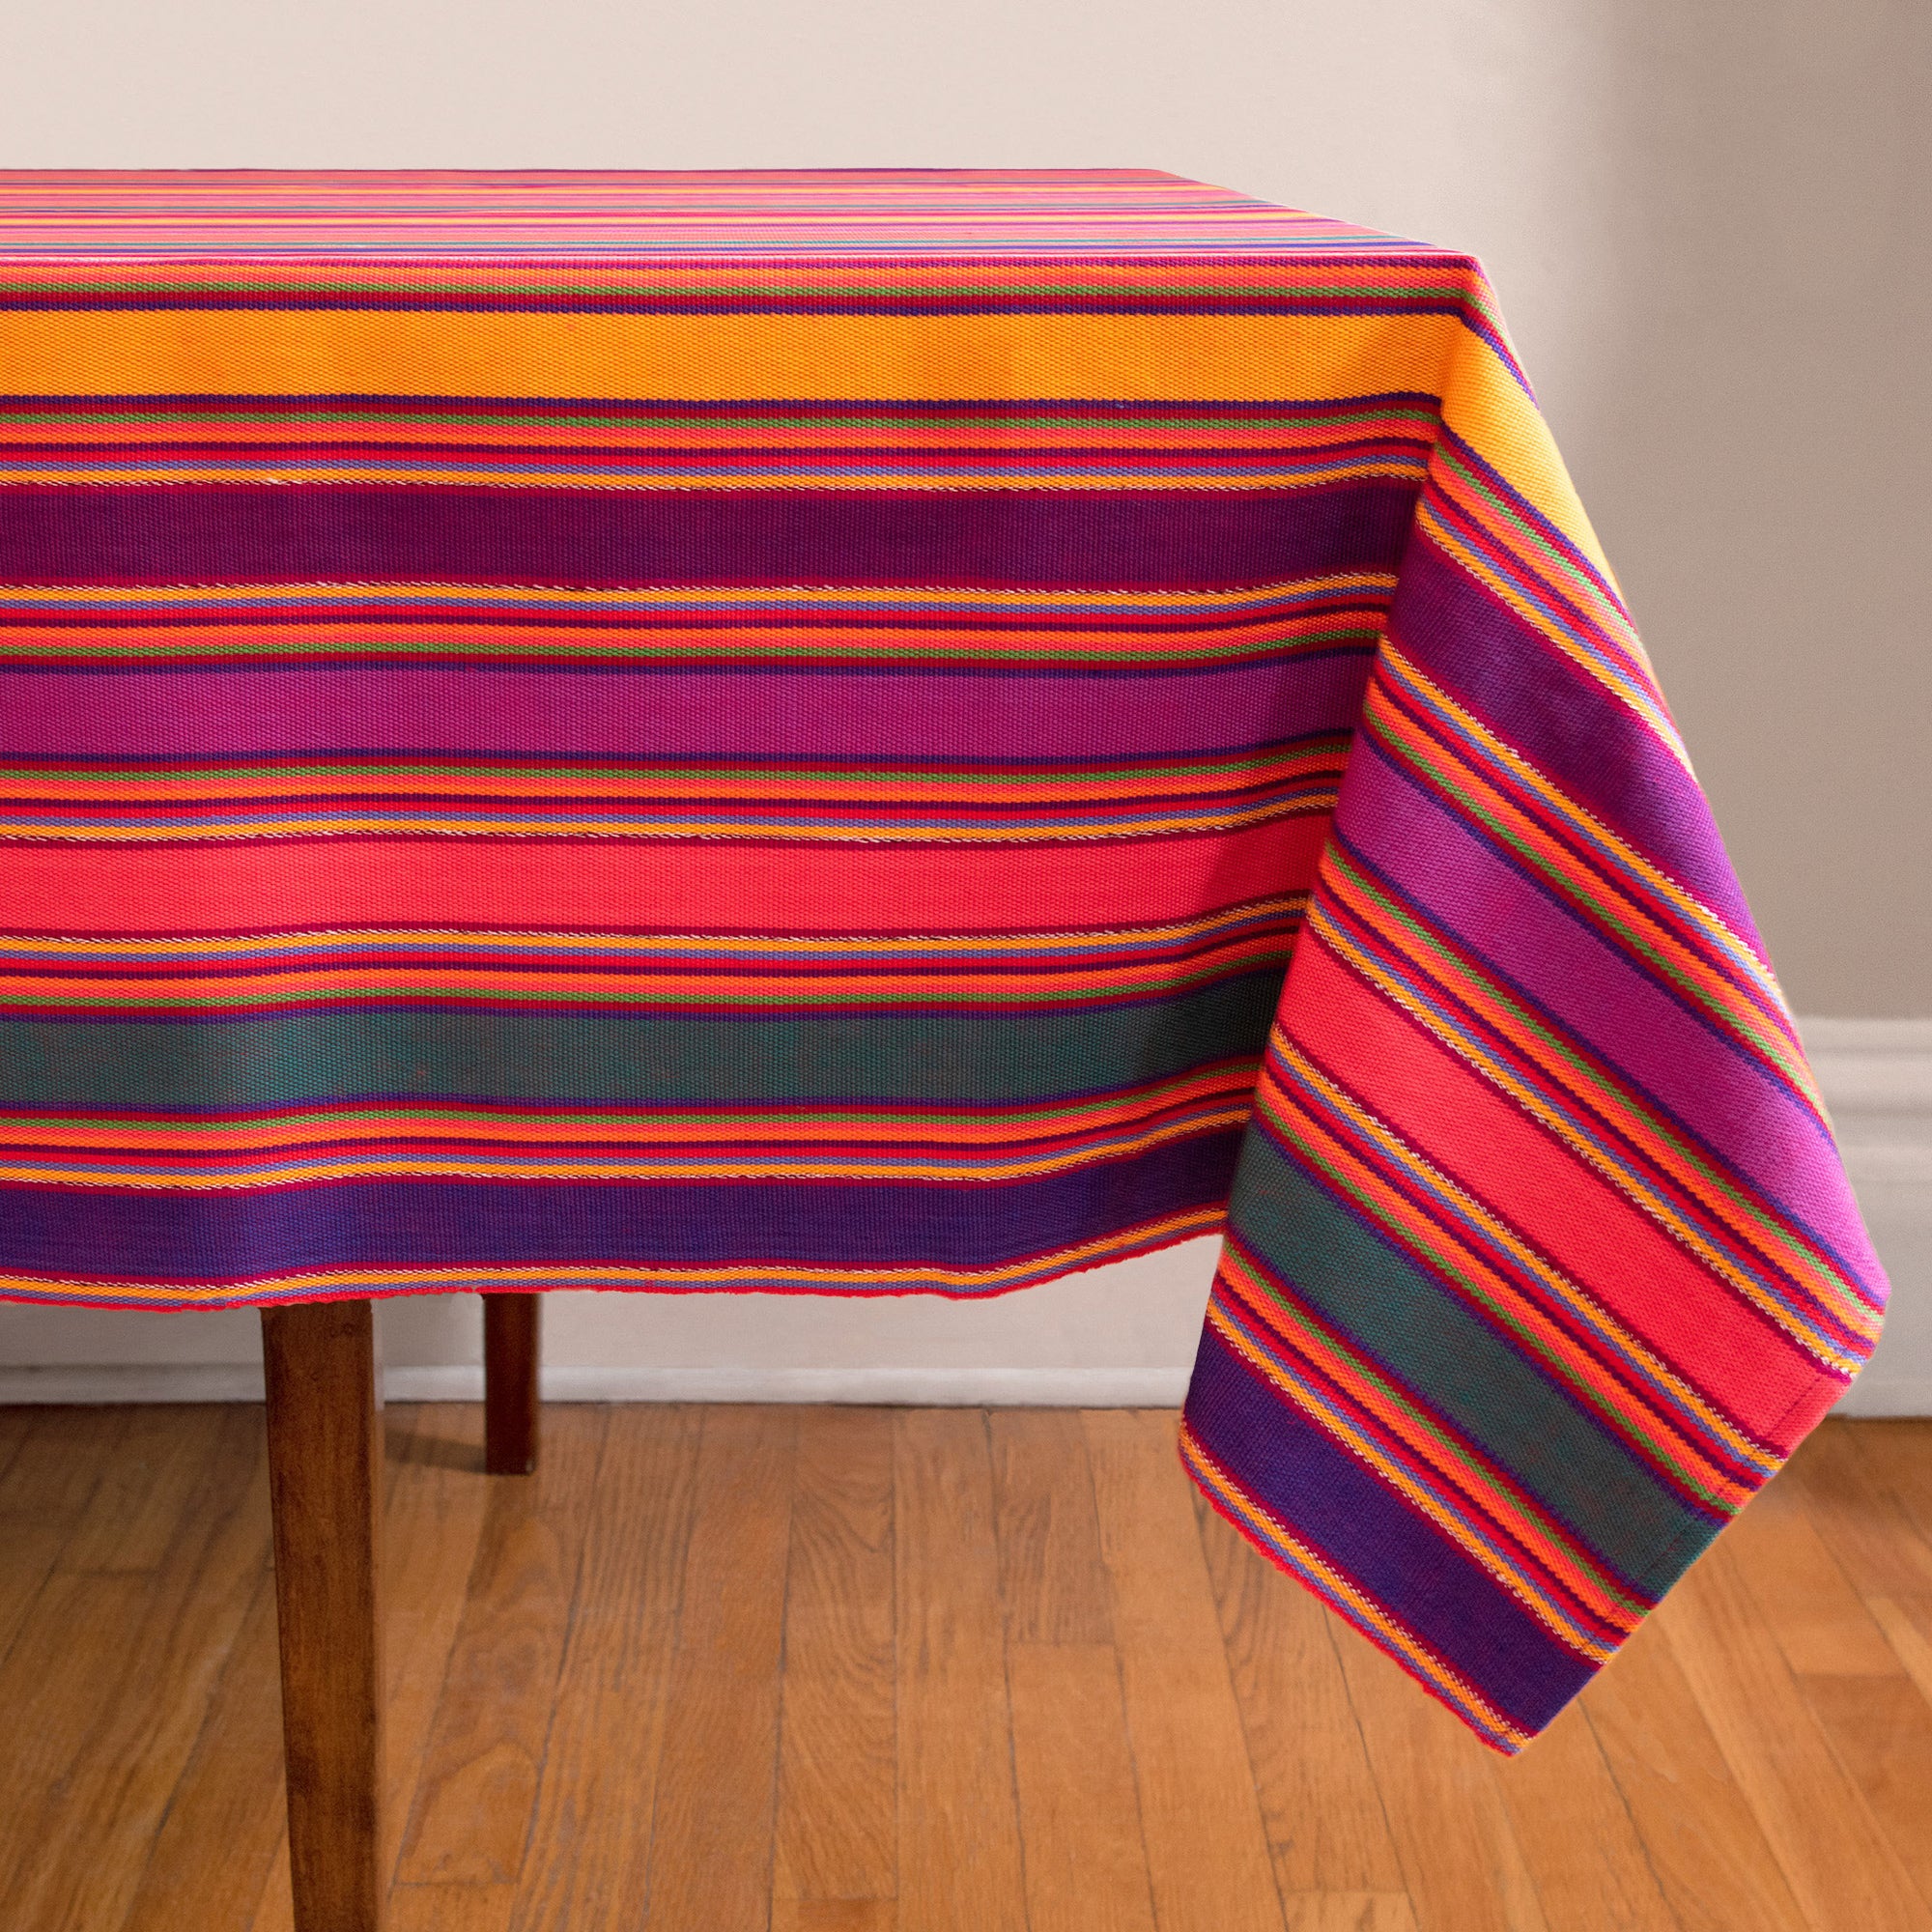 Striped Handwoven tablecloth